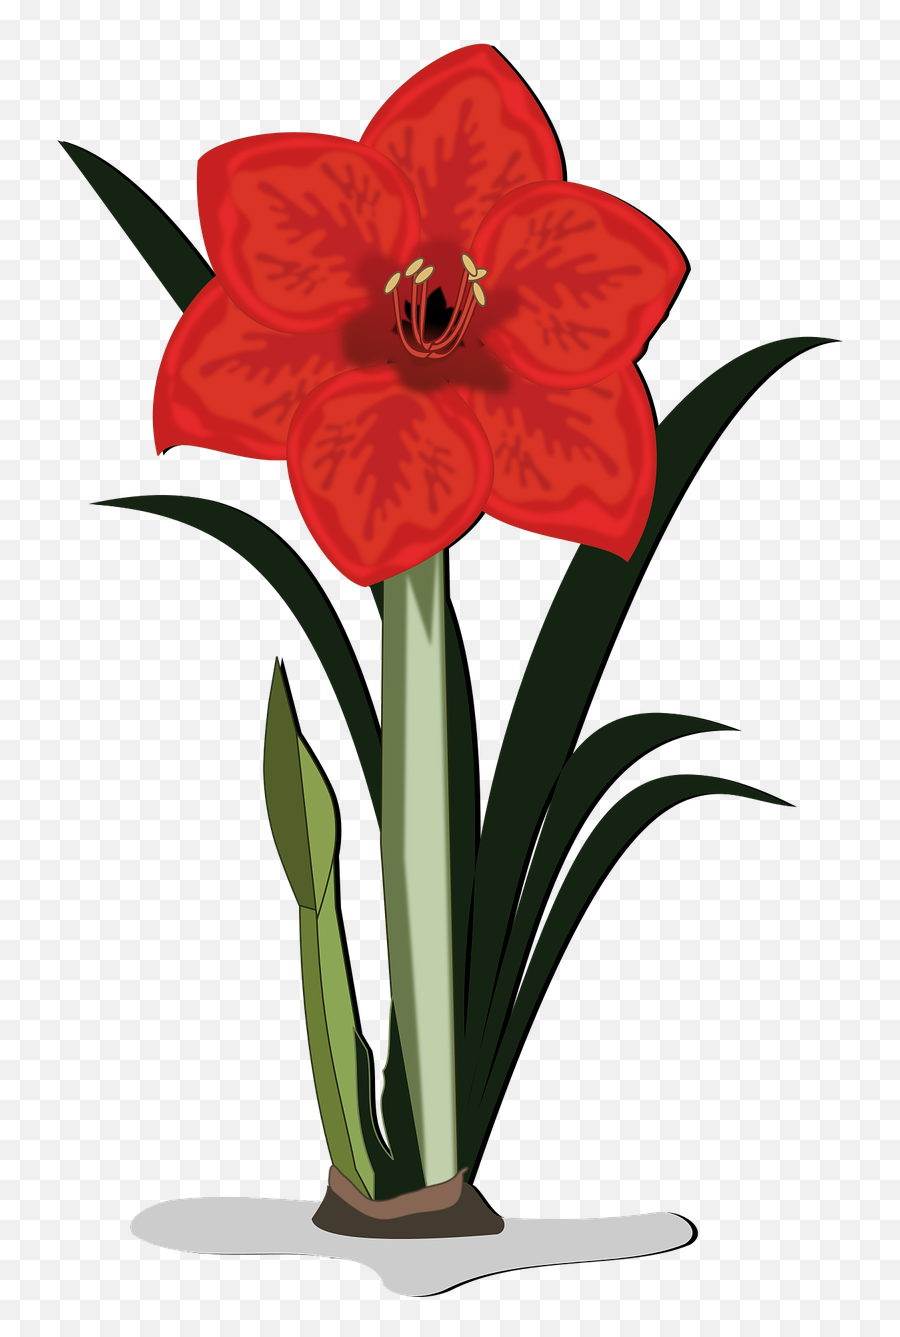 Red Lily Flower With Stem Clipart - Clip Art Emoji,Stem Clipart